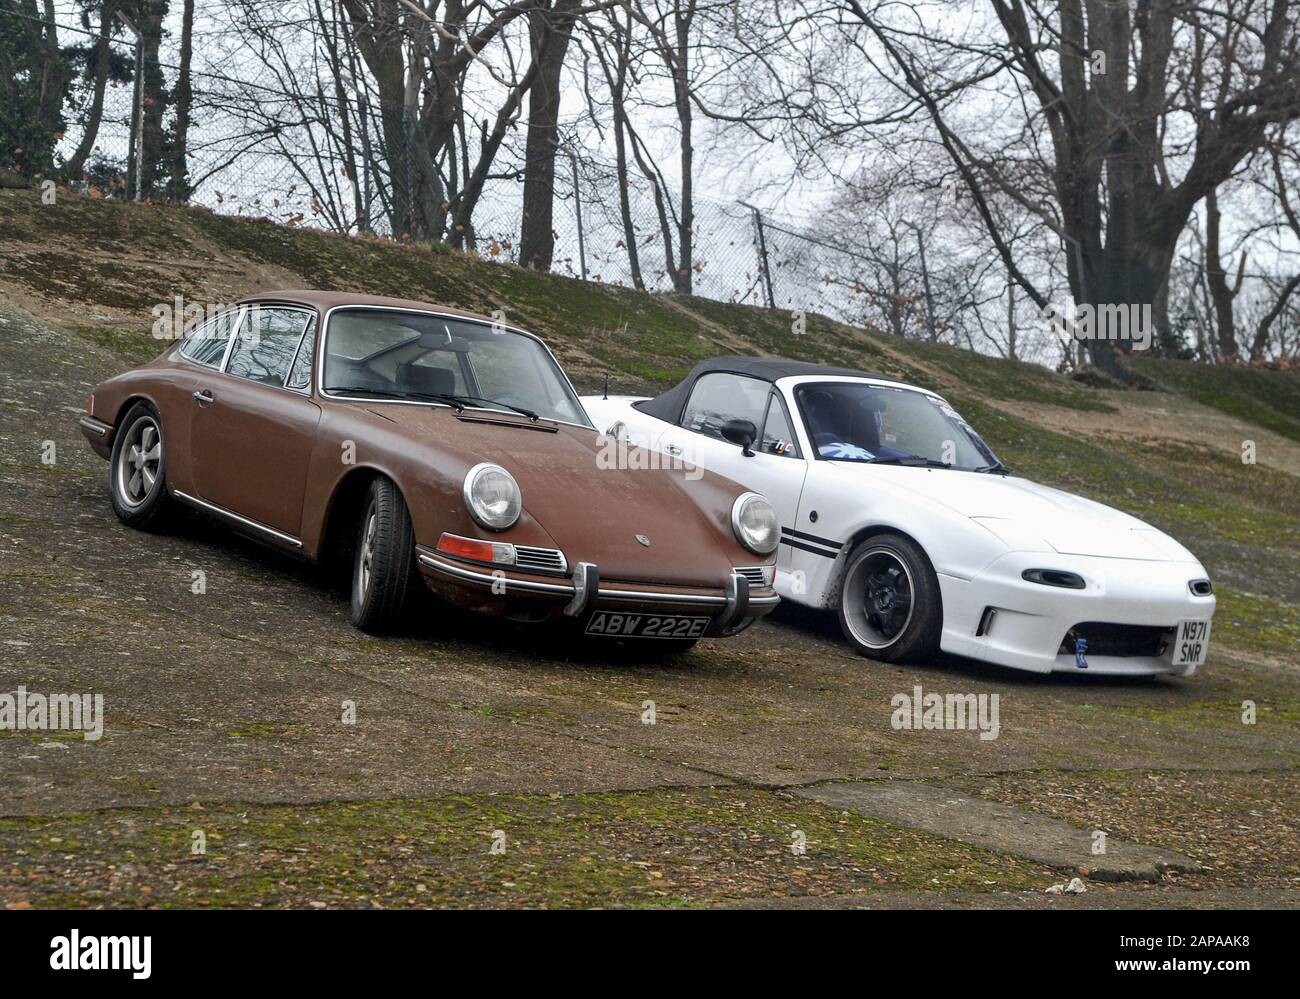 Brooklands New Years Day classic car meeting,  2015. Porsche 911 and Mazda MX5 Stock Photo